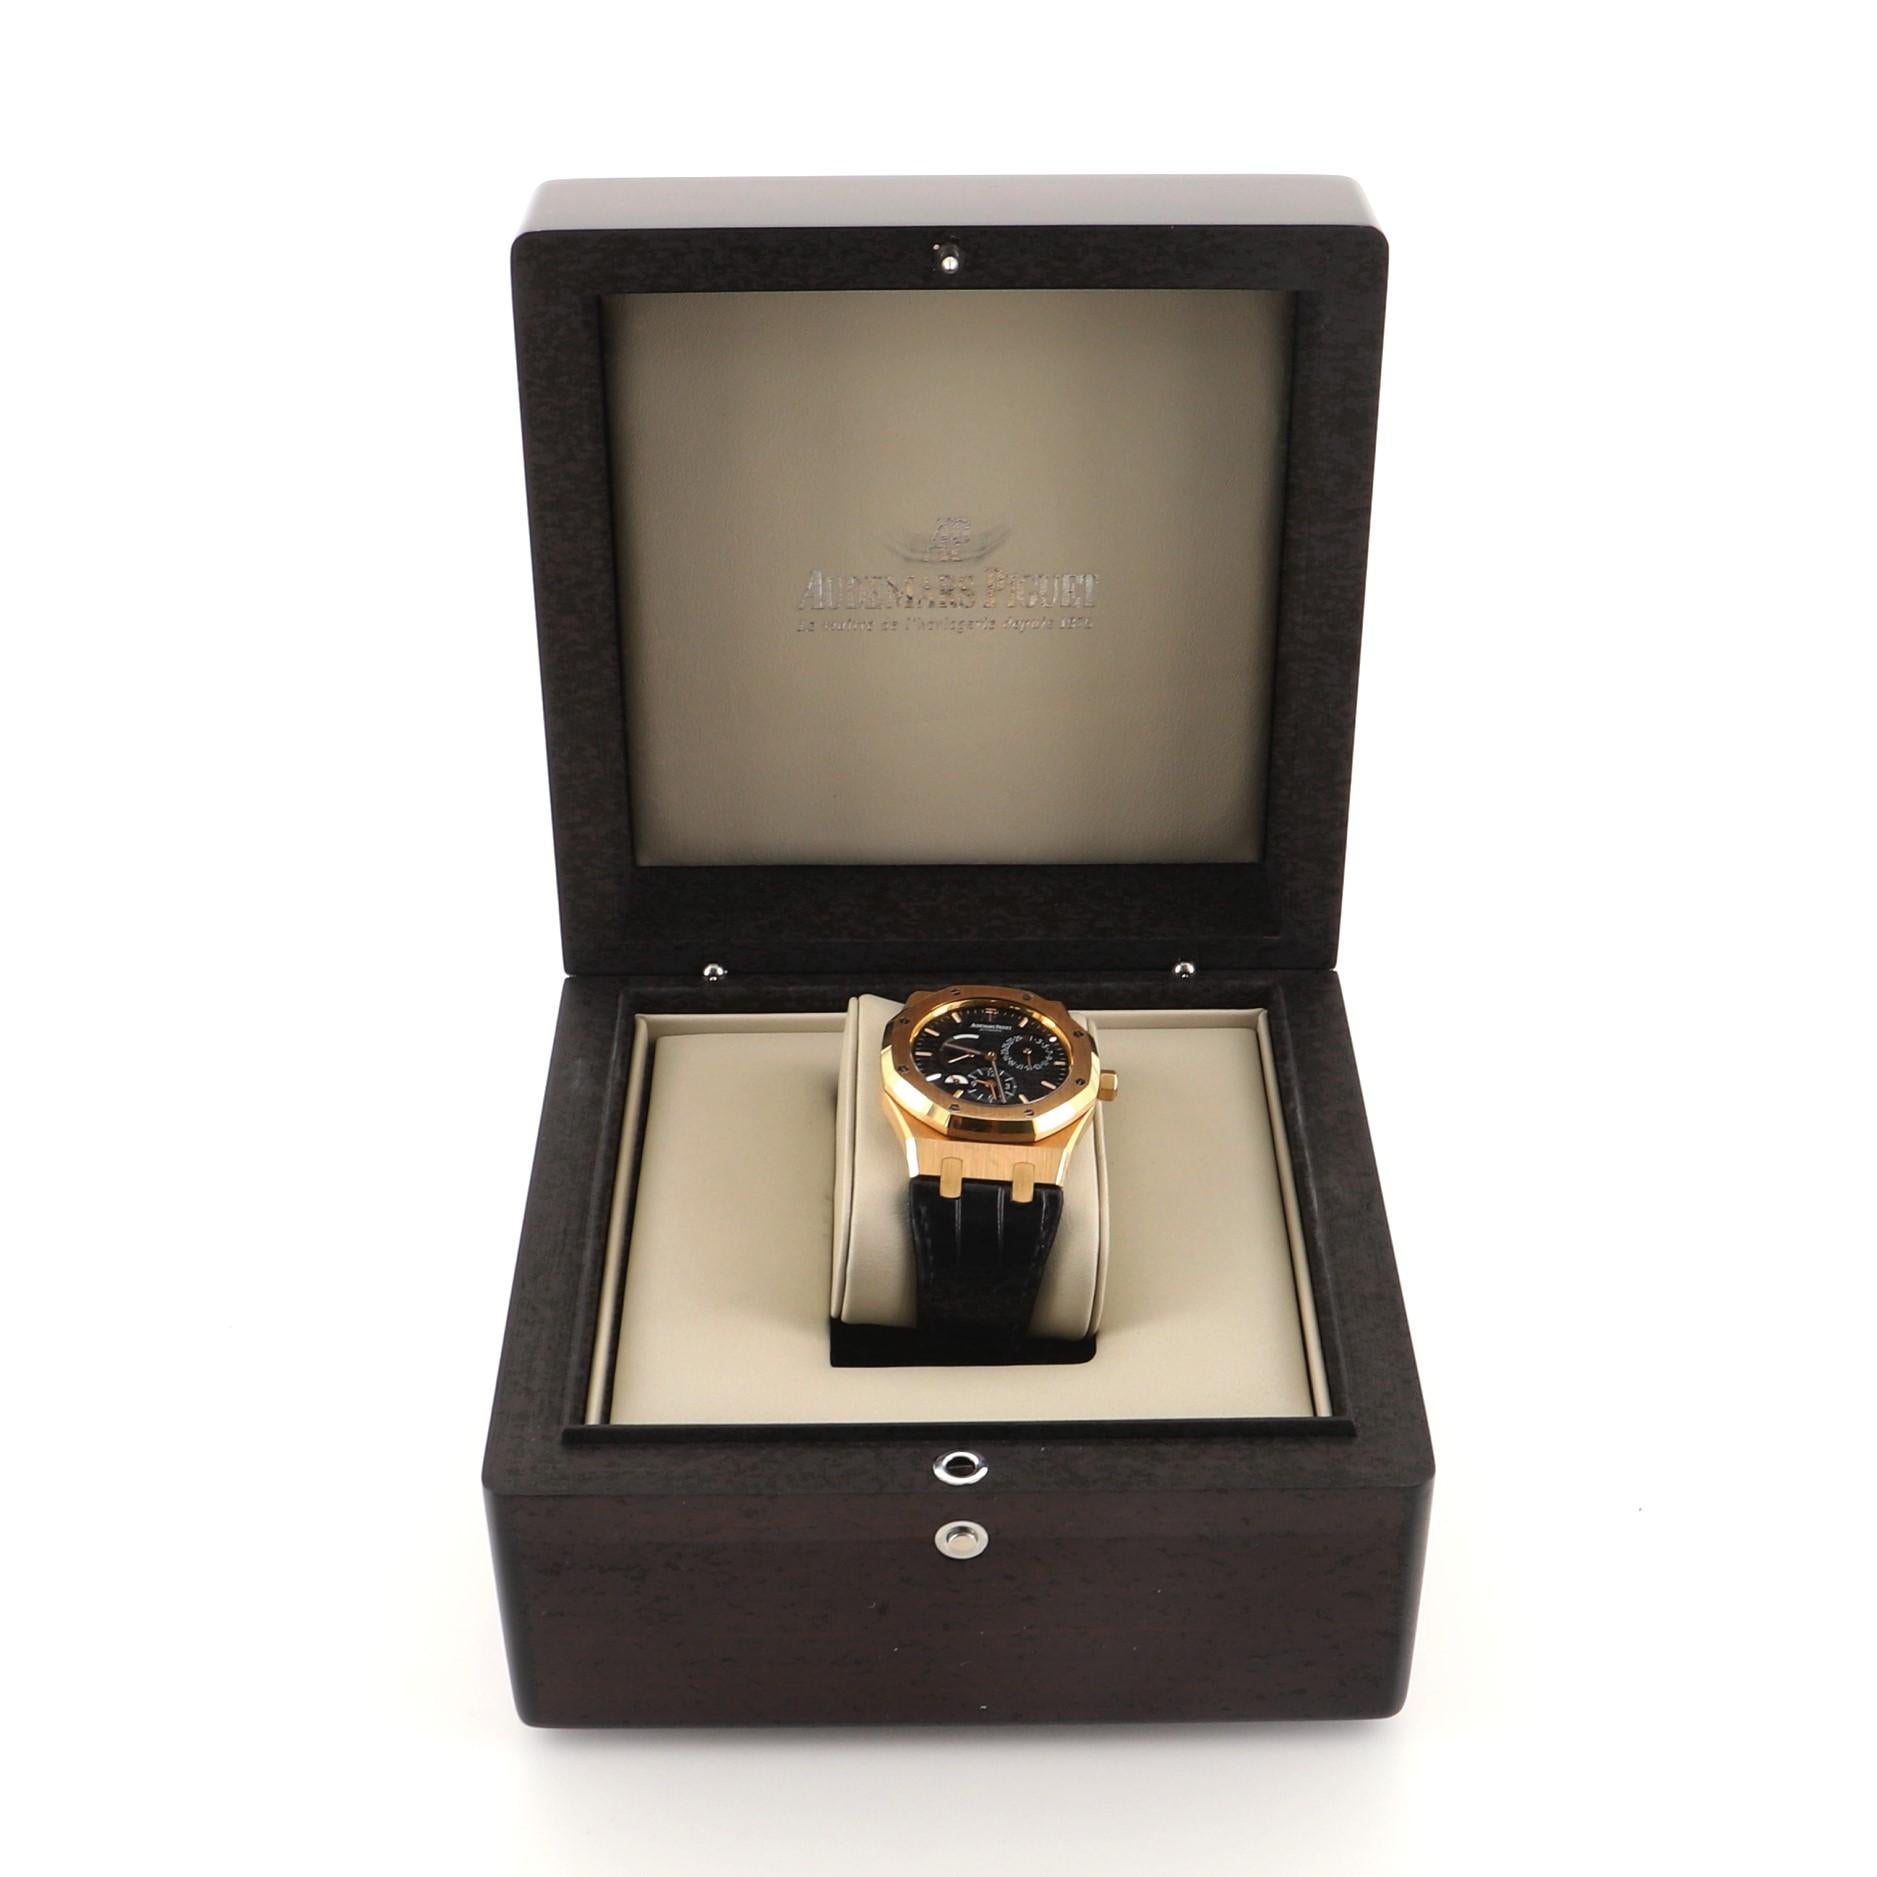 This item can only be shipped within the United States.

Condition: Good. Moderate scratches and wear throughout.
Accessories: Box, Authenticity Card
Measurements: Case Size/Width: 39mm, Watch Height: 10mm, Band Width: 27mm, Wrist circumference: